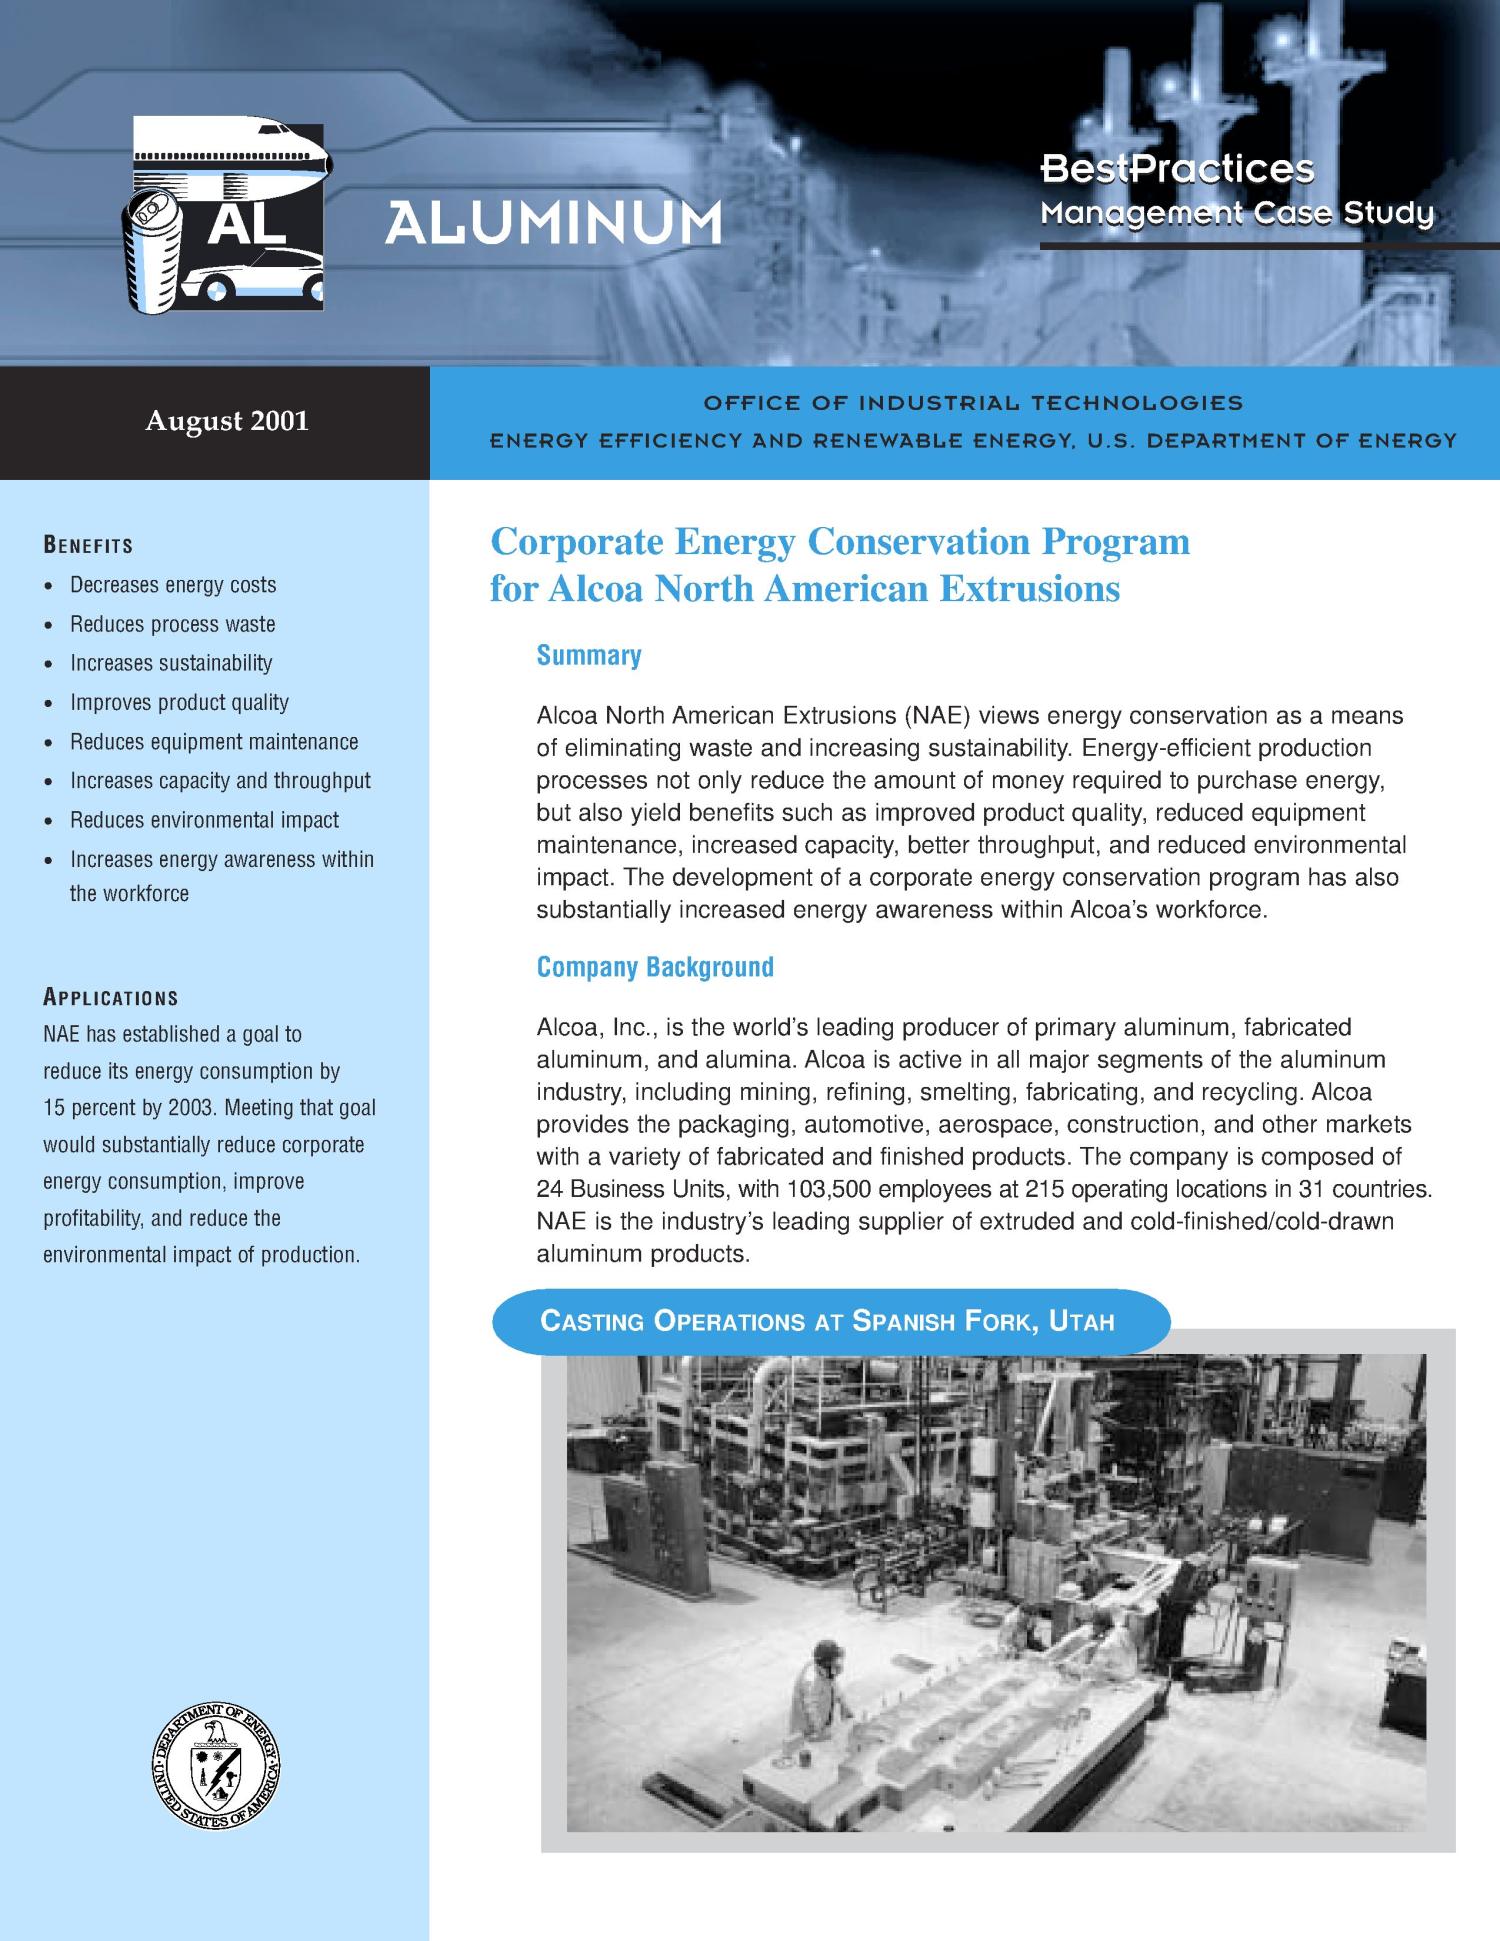 Corporate Energy Conservation Program for Alcoa North American Extrusions: Office of Industrial Technologies (OIT) Aluminum BestPractices Management Case Study
                                                
                                                    [Sequence #]: 1 of 4
                                                